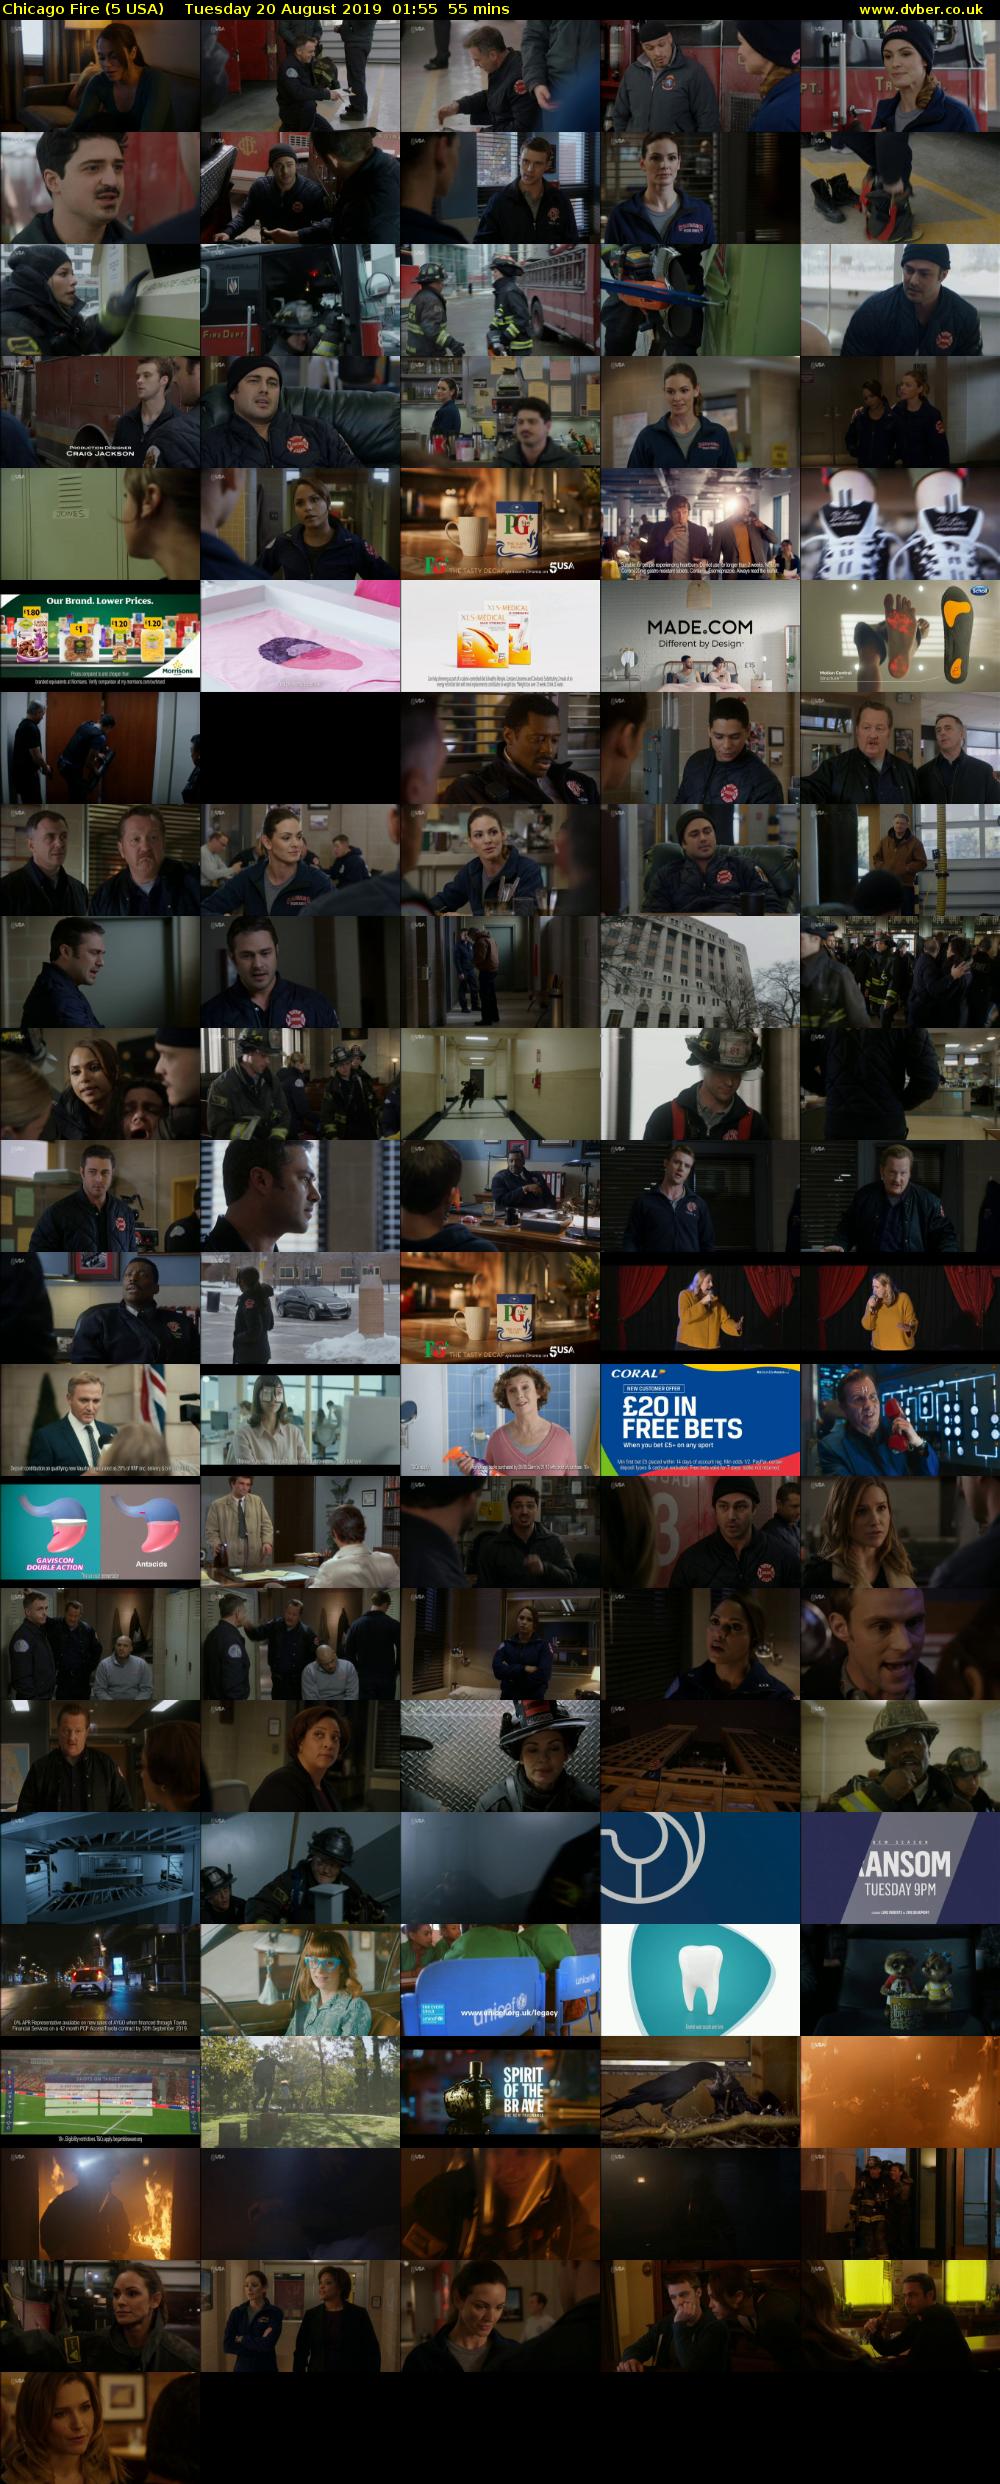 Chicago Fire (5 USA) Tuesday 20 August 2019 01:55 - 02:50